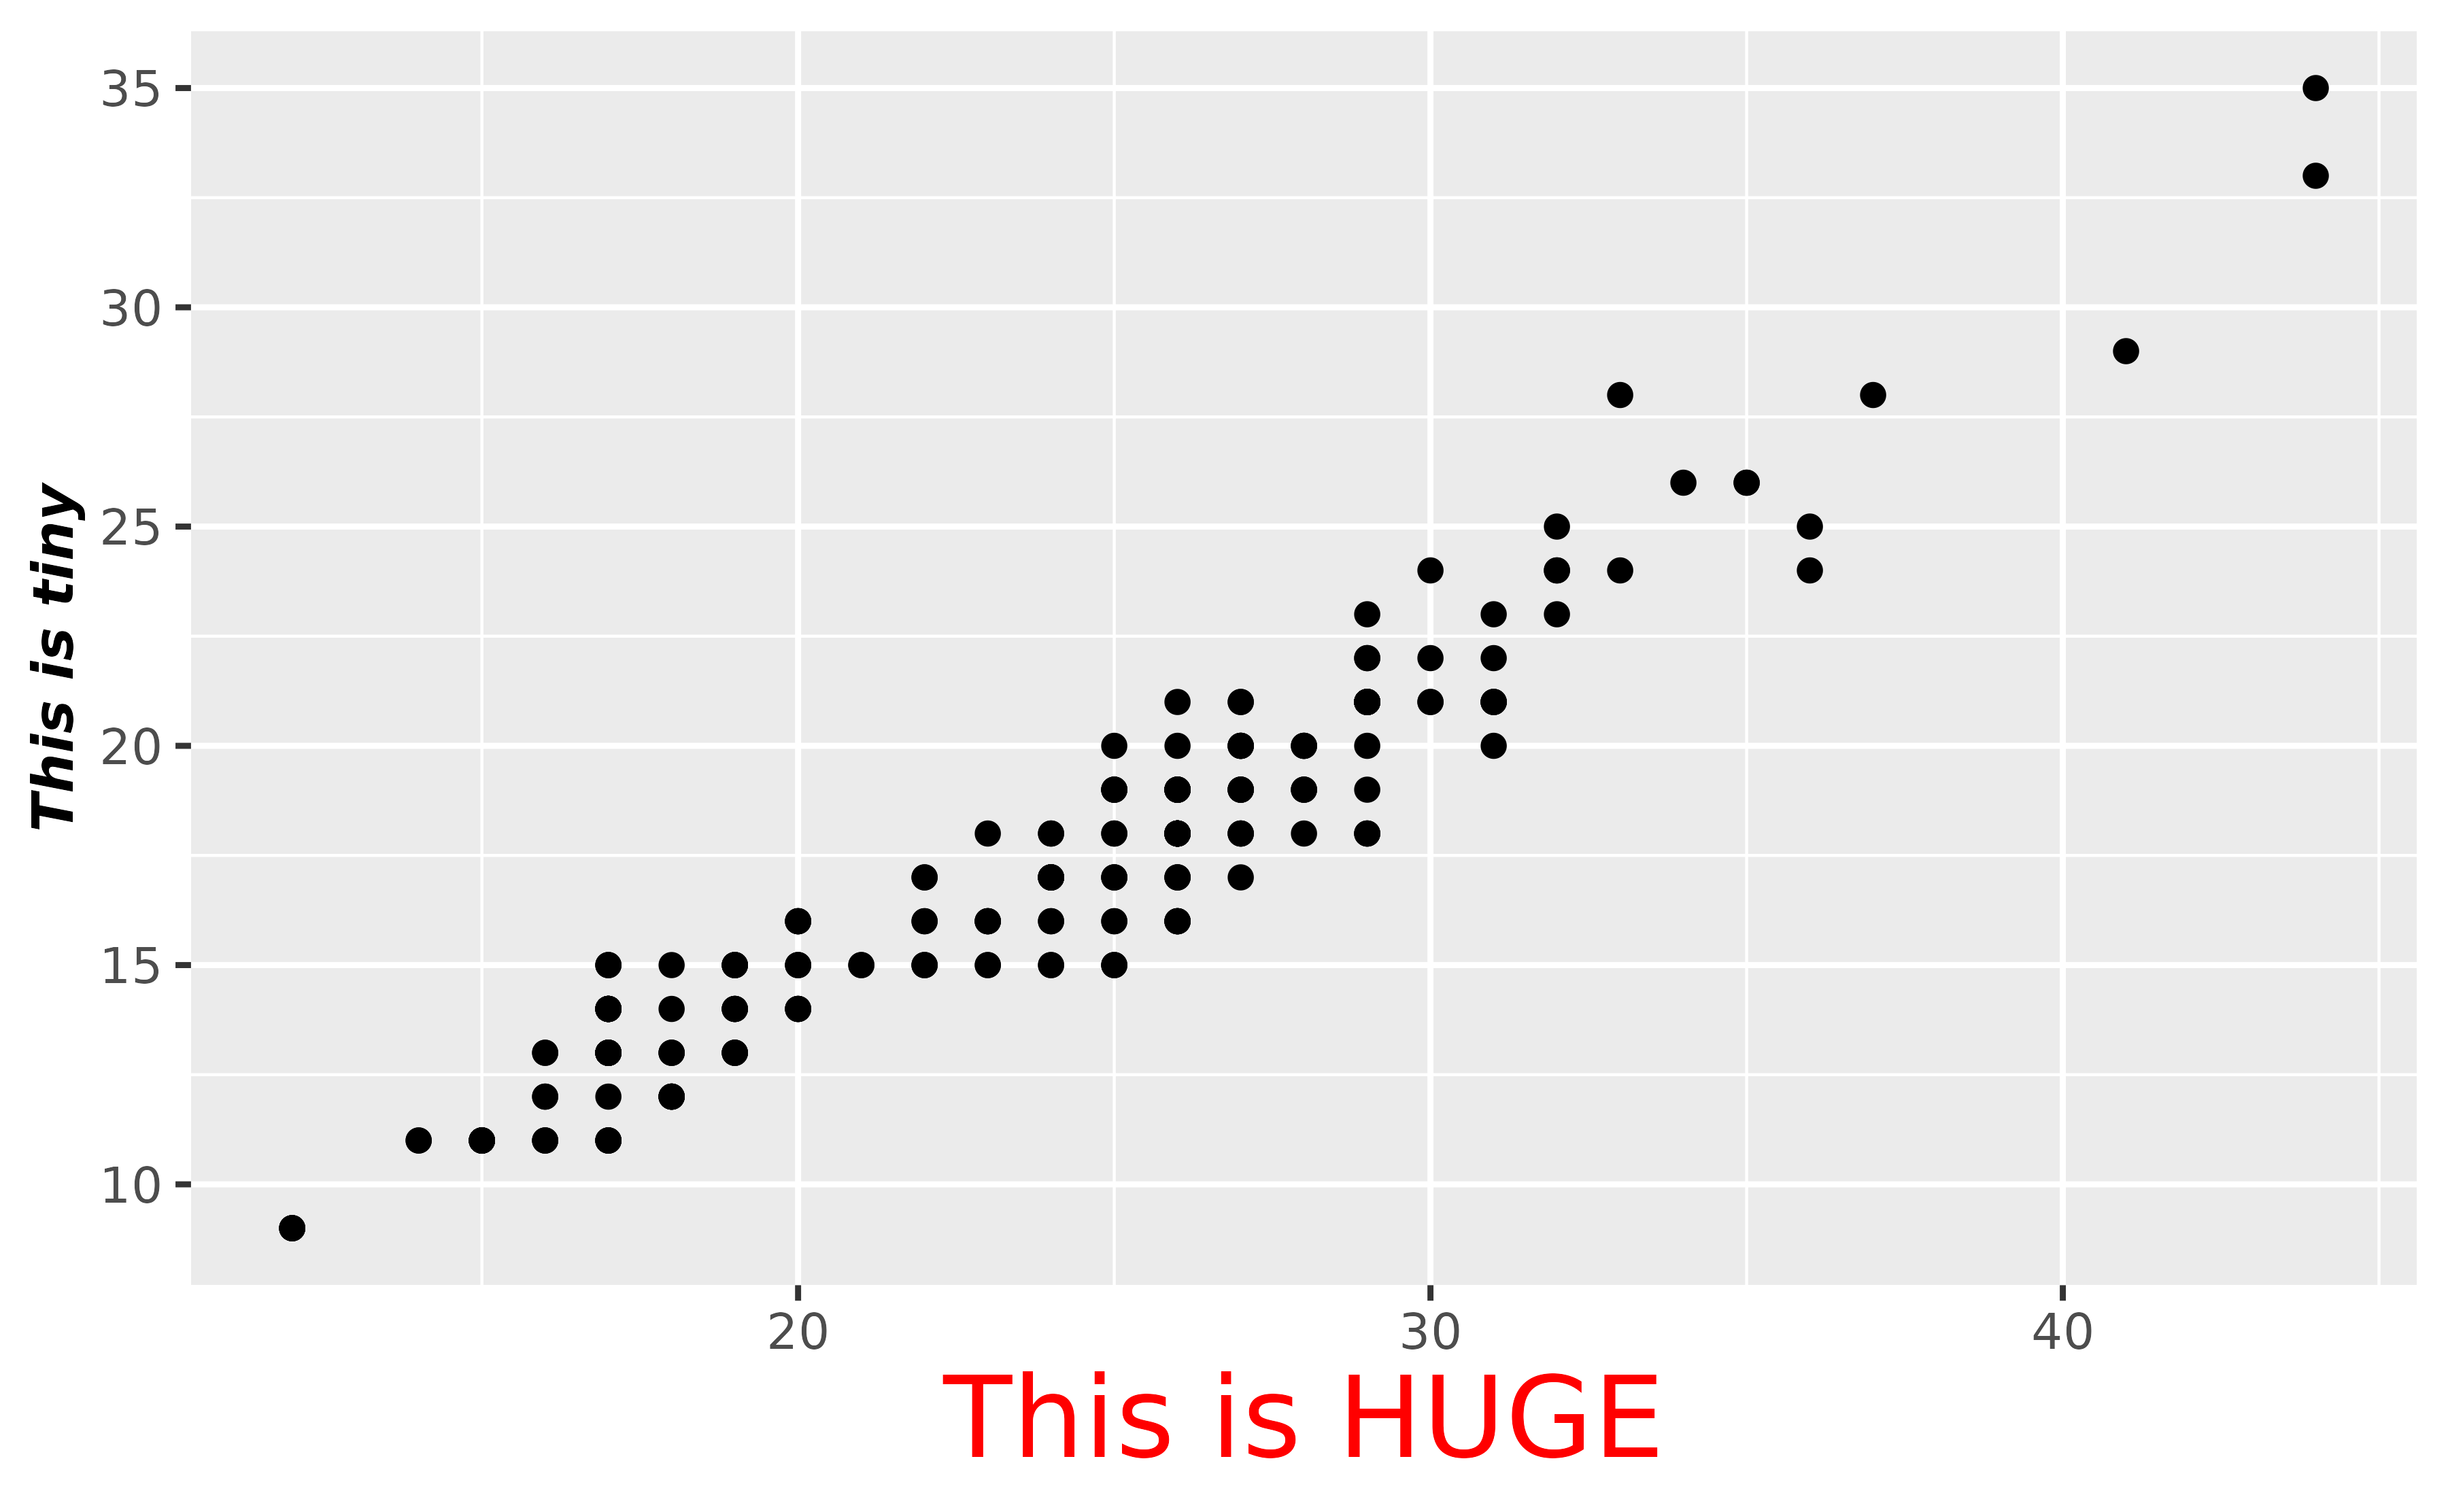 A scatter plot showing the highway miles per gallon on the x-axis and city miles per gallon on the y-axis. The x-axis title displays 'This is HUGE' in a large, red font, and the y-axis title displays 'This is tiny' in a smaller, bold and italic font.